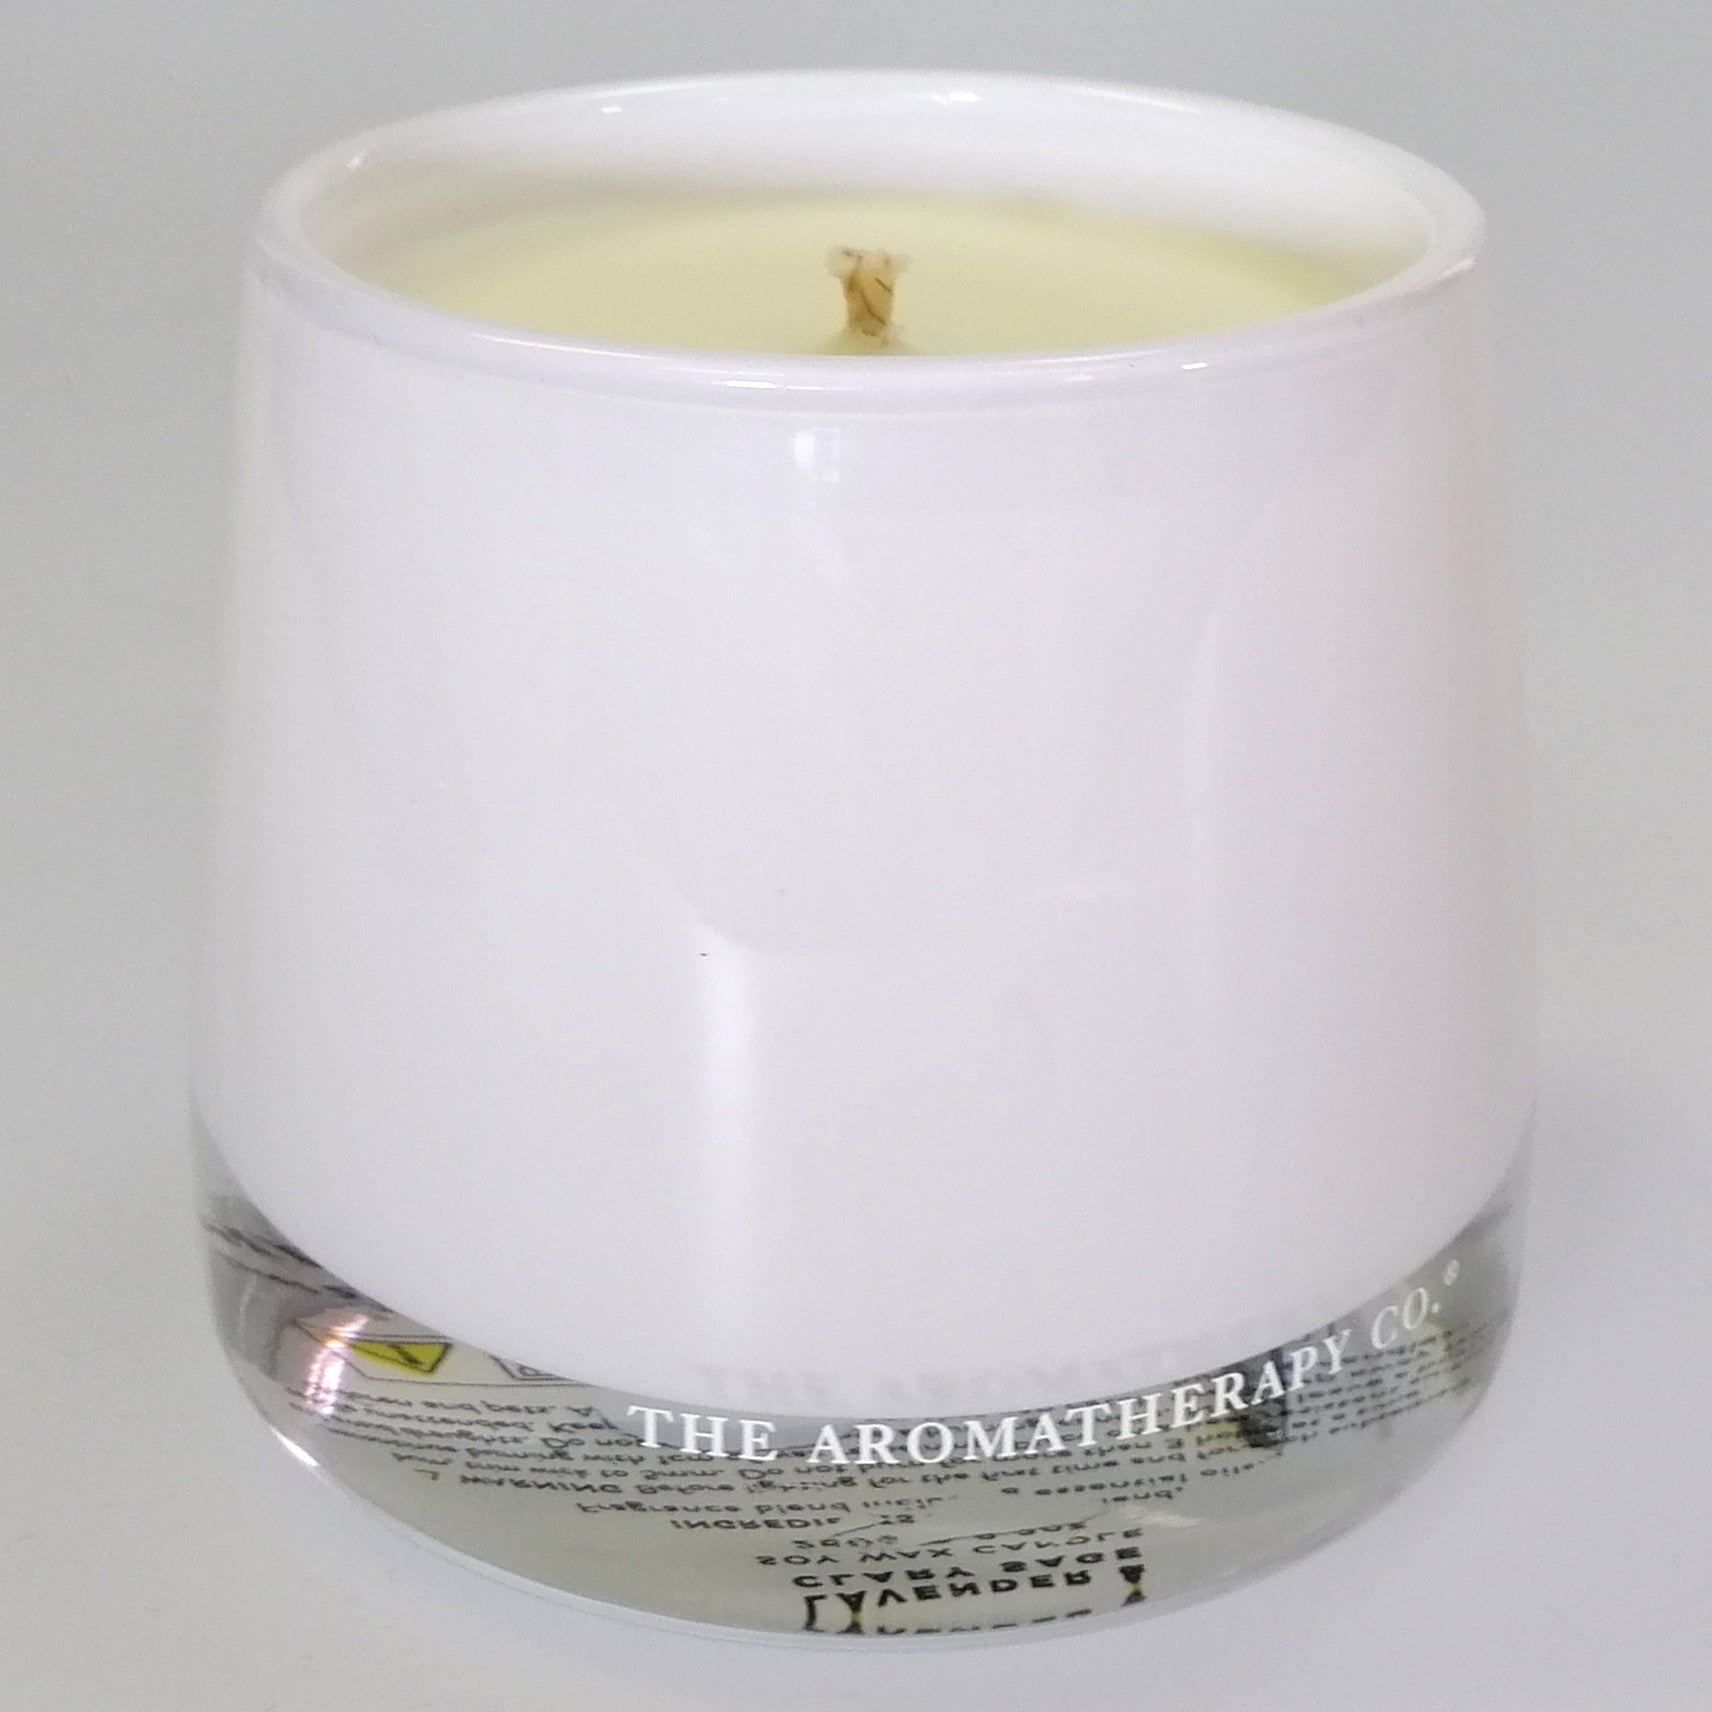 The Aromatherapy Company - Therapy Range 'Relax' - Candle - Lavender & Clary Sage